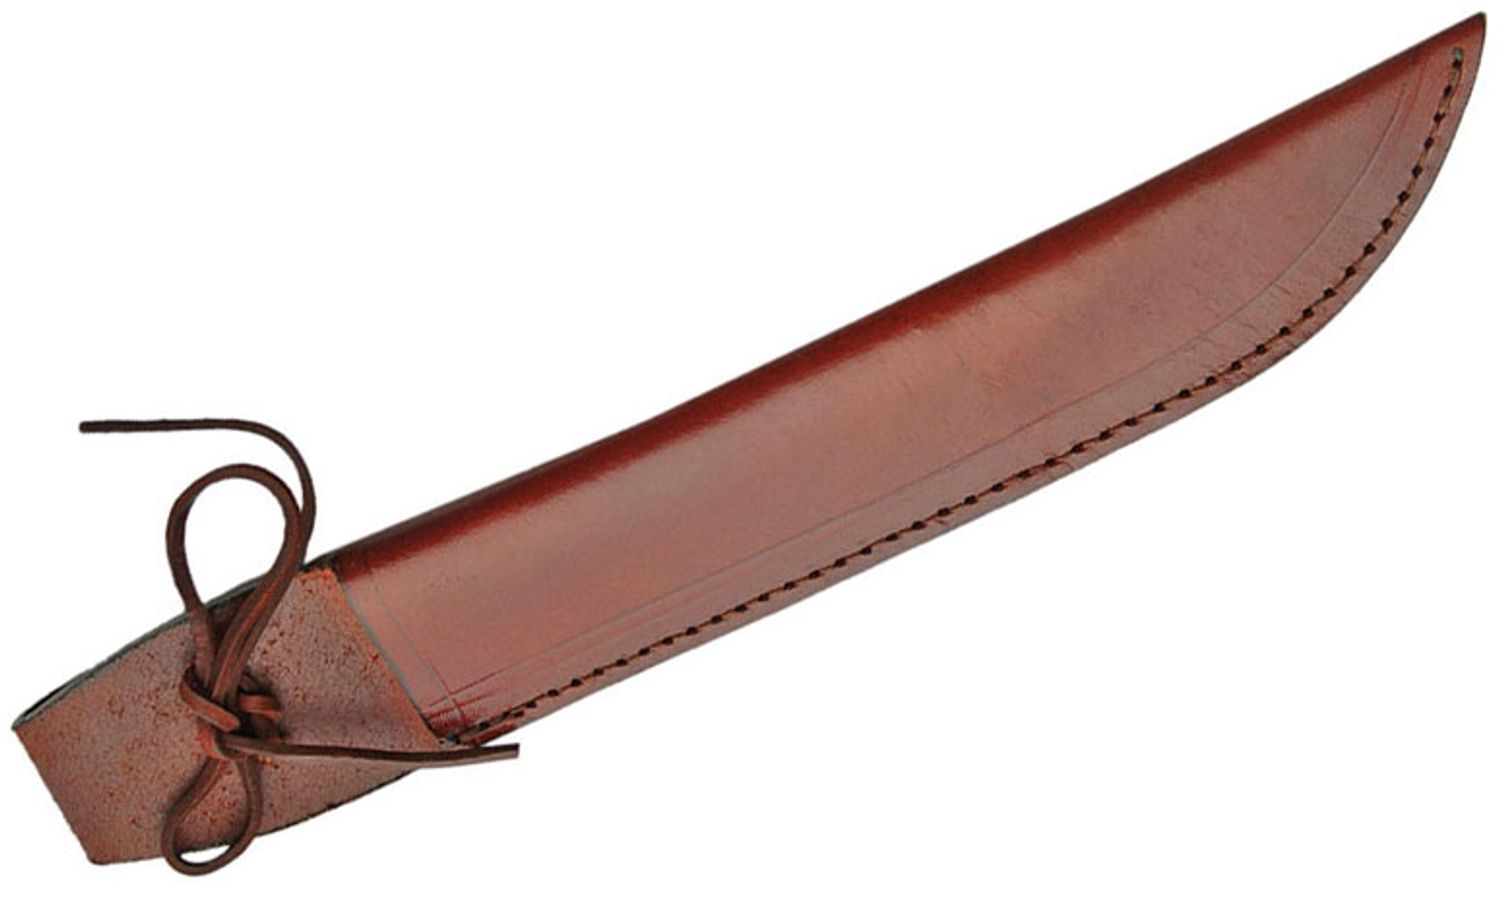 Brown Leather Sheath, Fits Most Fixed Blades Up to 5 - KnifeCenter - SH1161